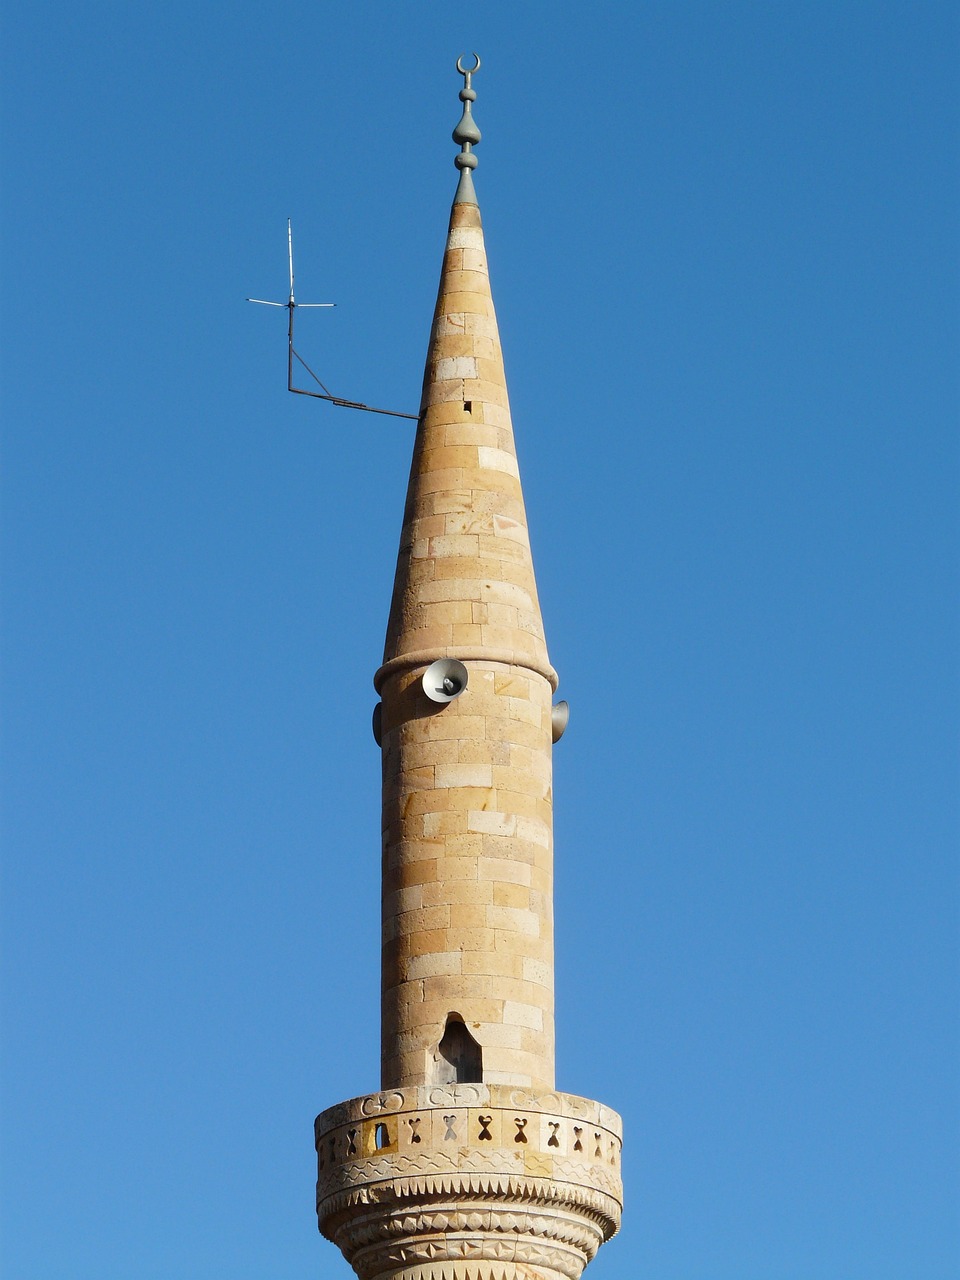 a tall tower with a clock on top of it, by Robert Brackman, flickr, romanesque, old town mardin, lead - covered spire, snail, tripod